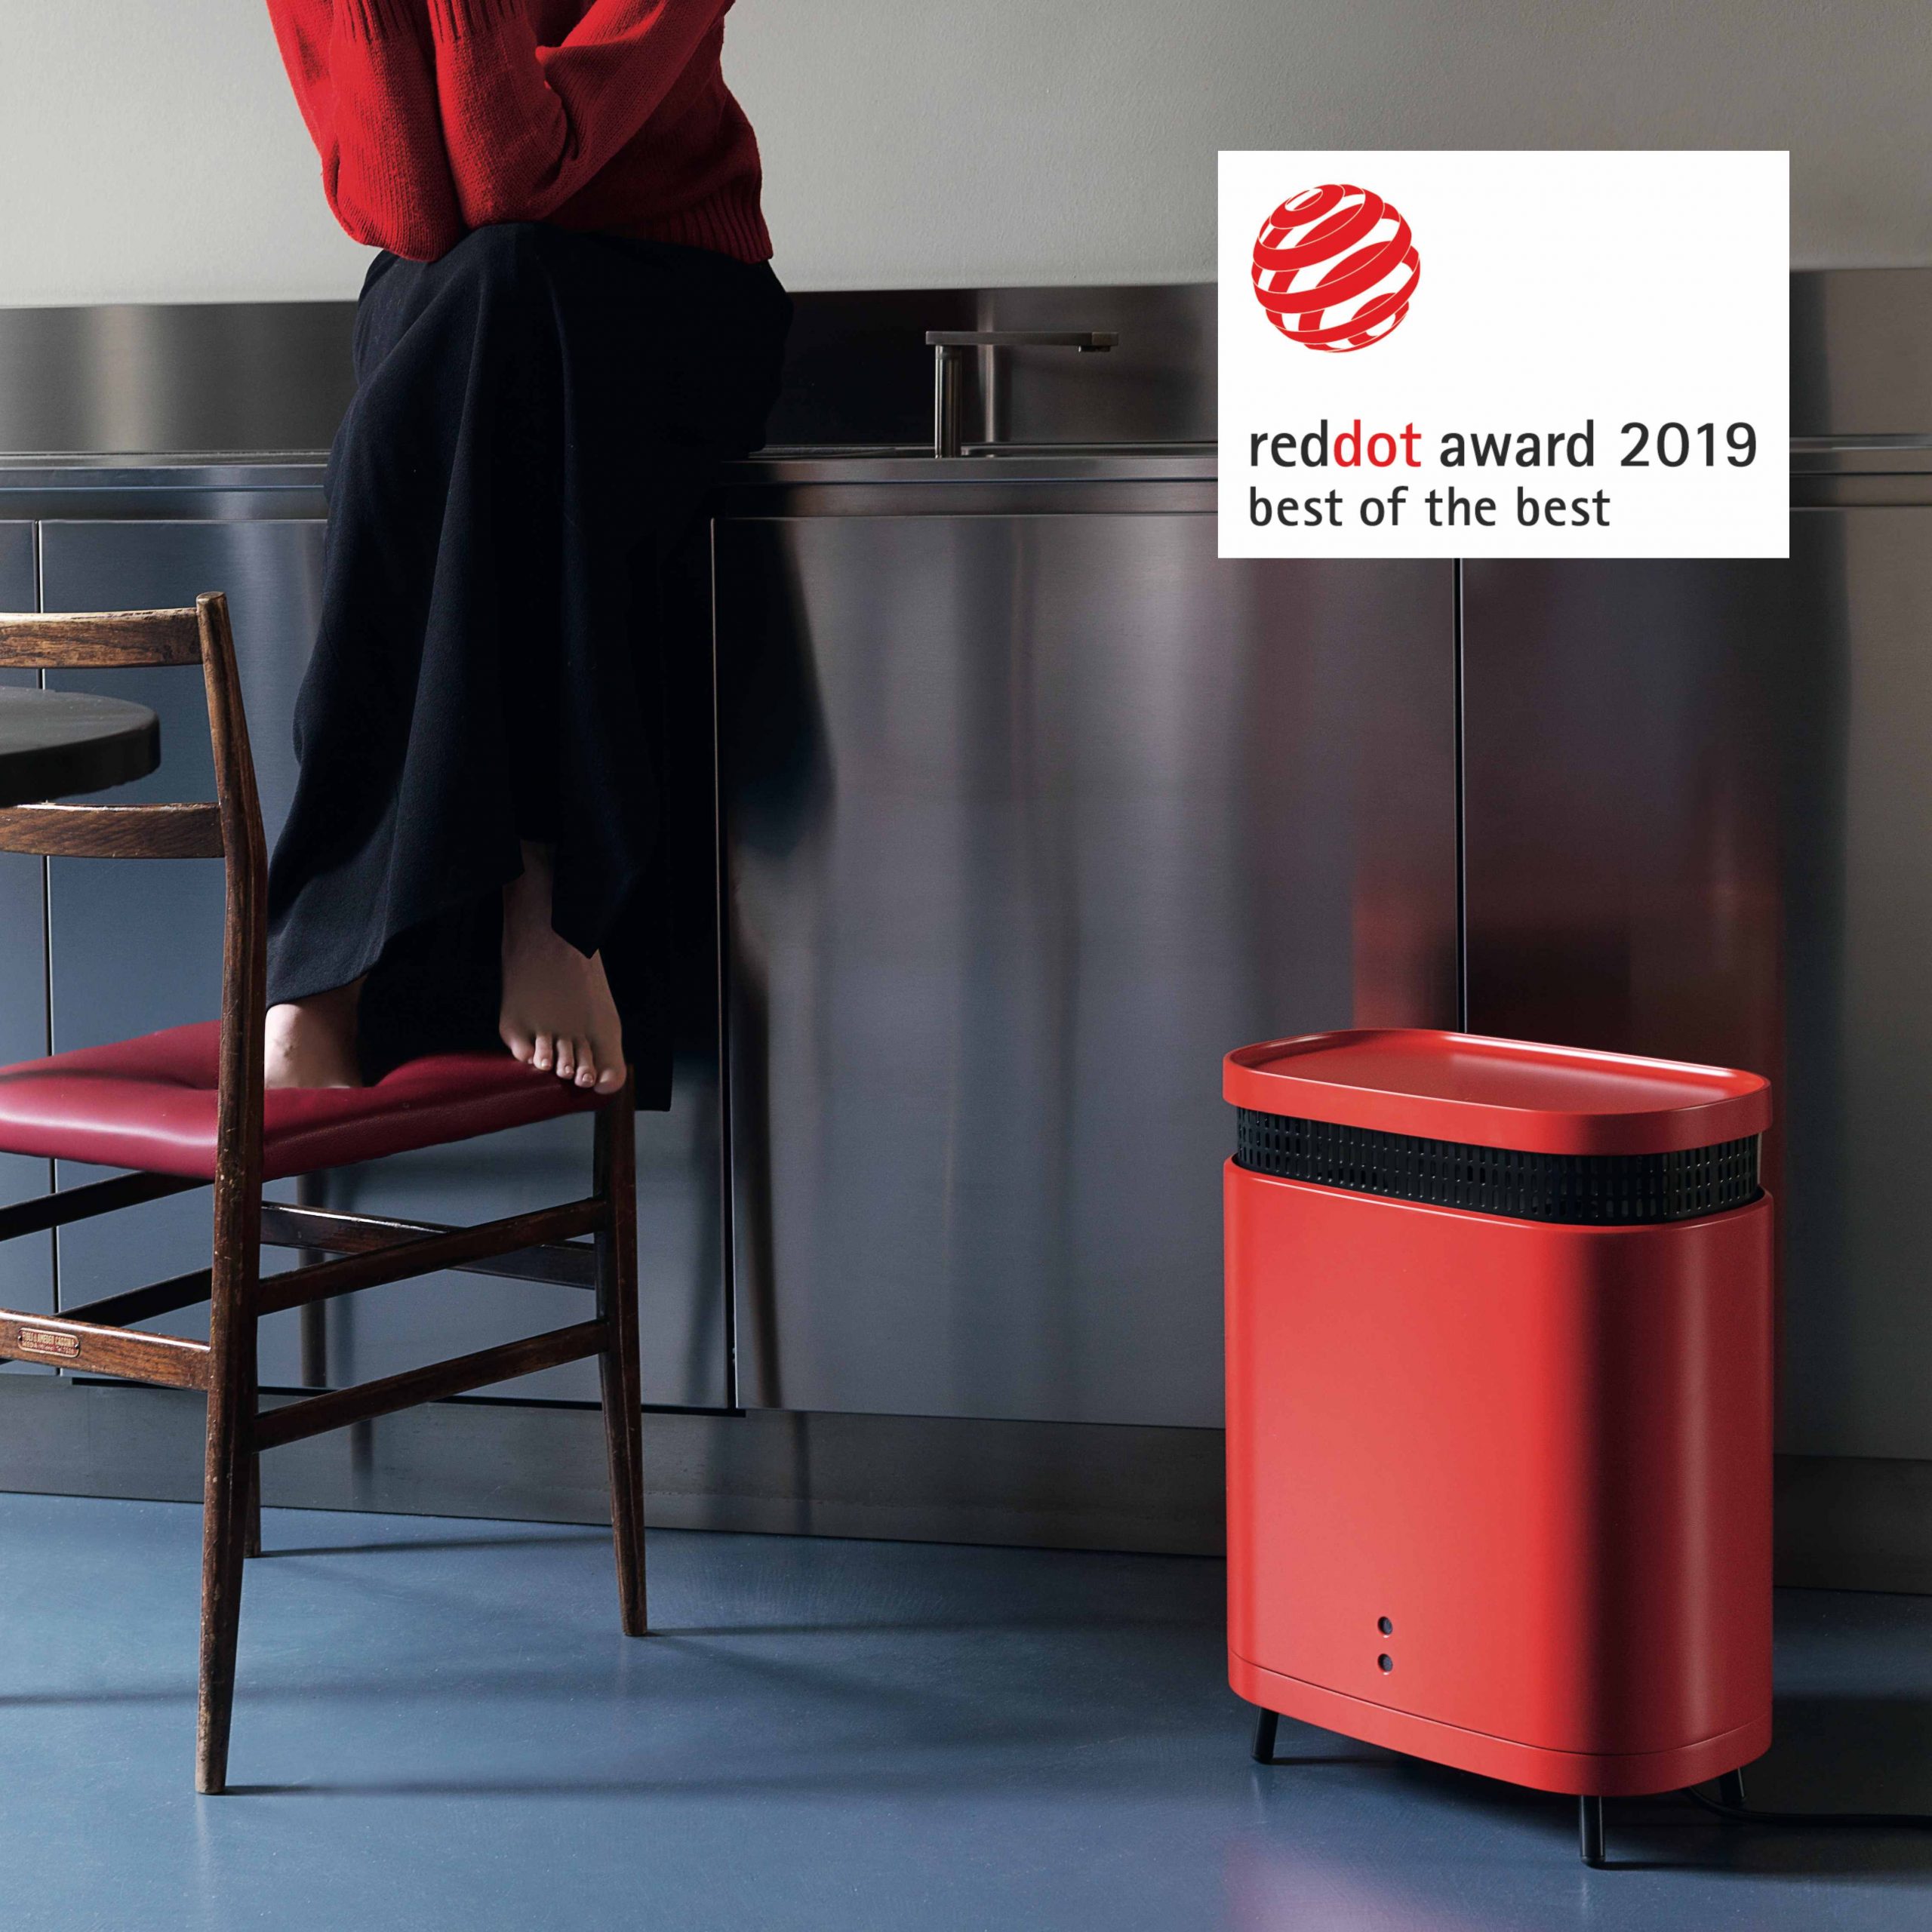 Astro vince il Red Dot Design Award 2019 Best Of The Best